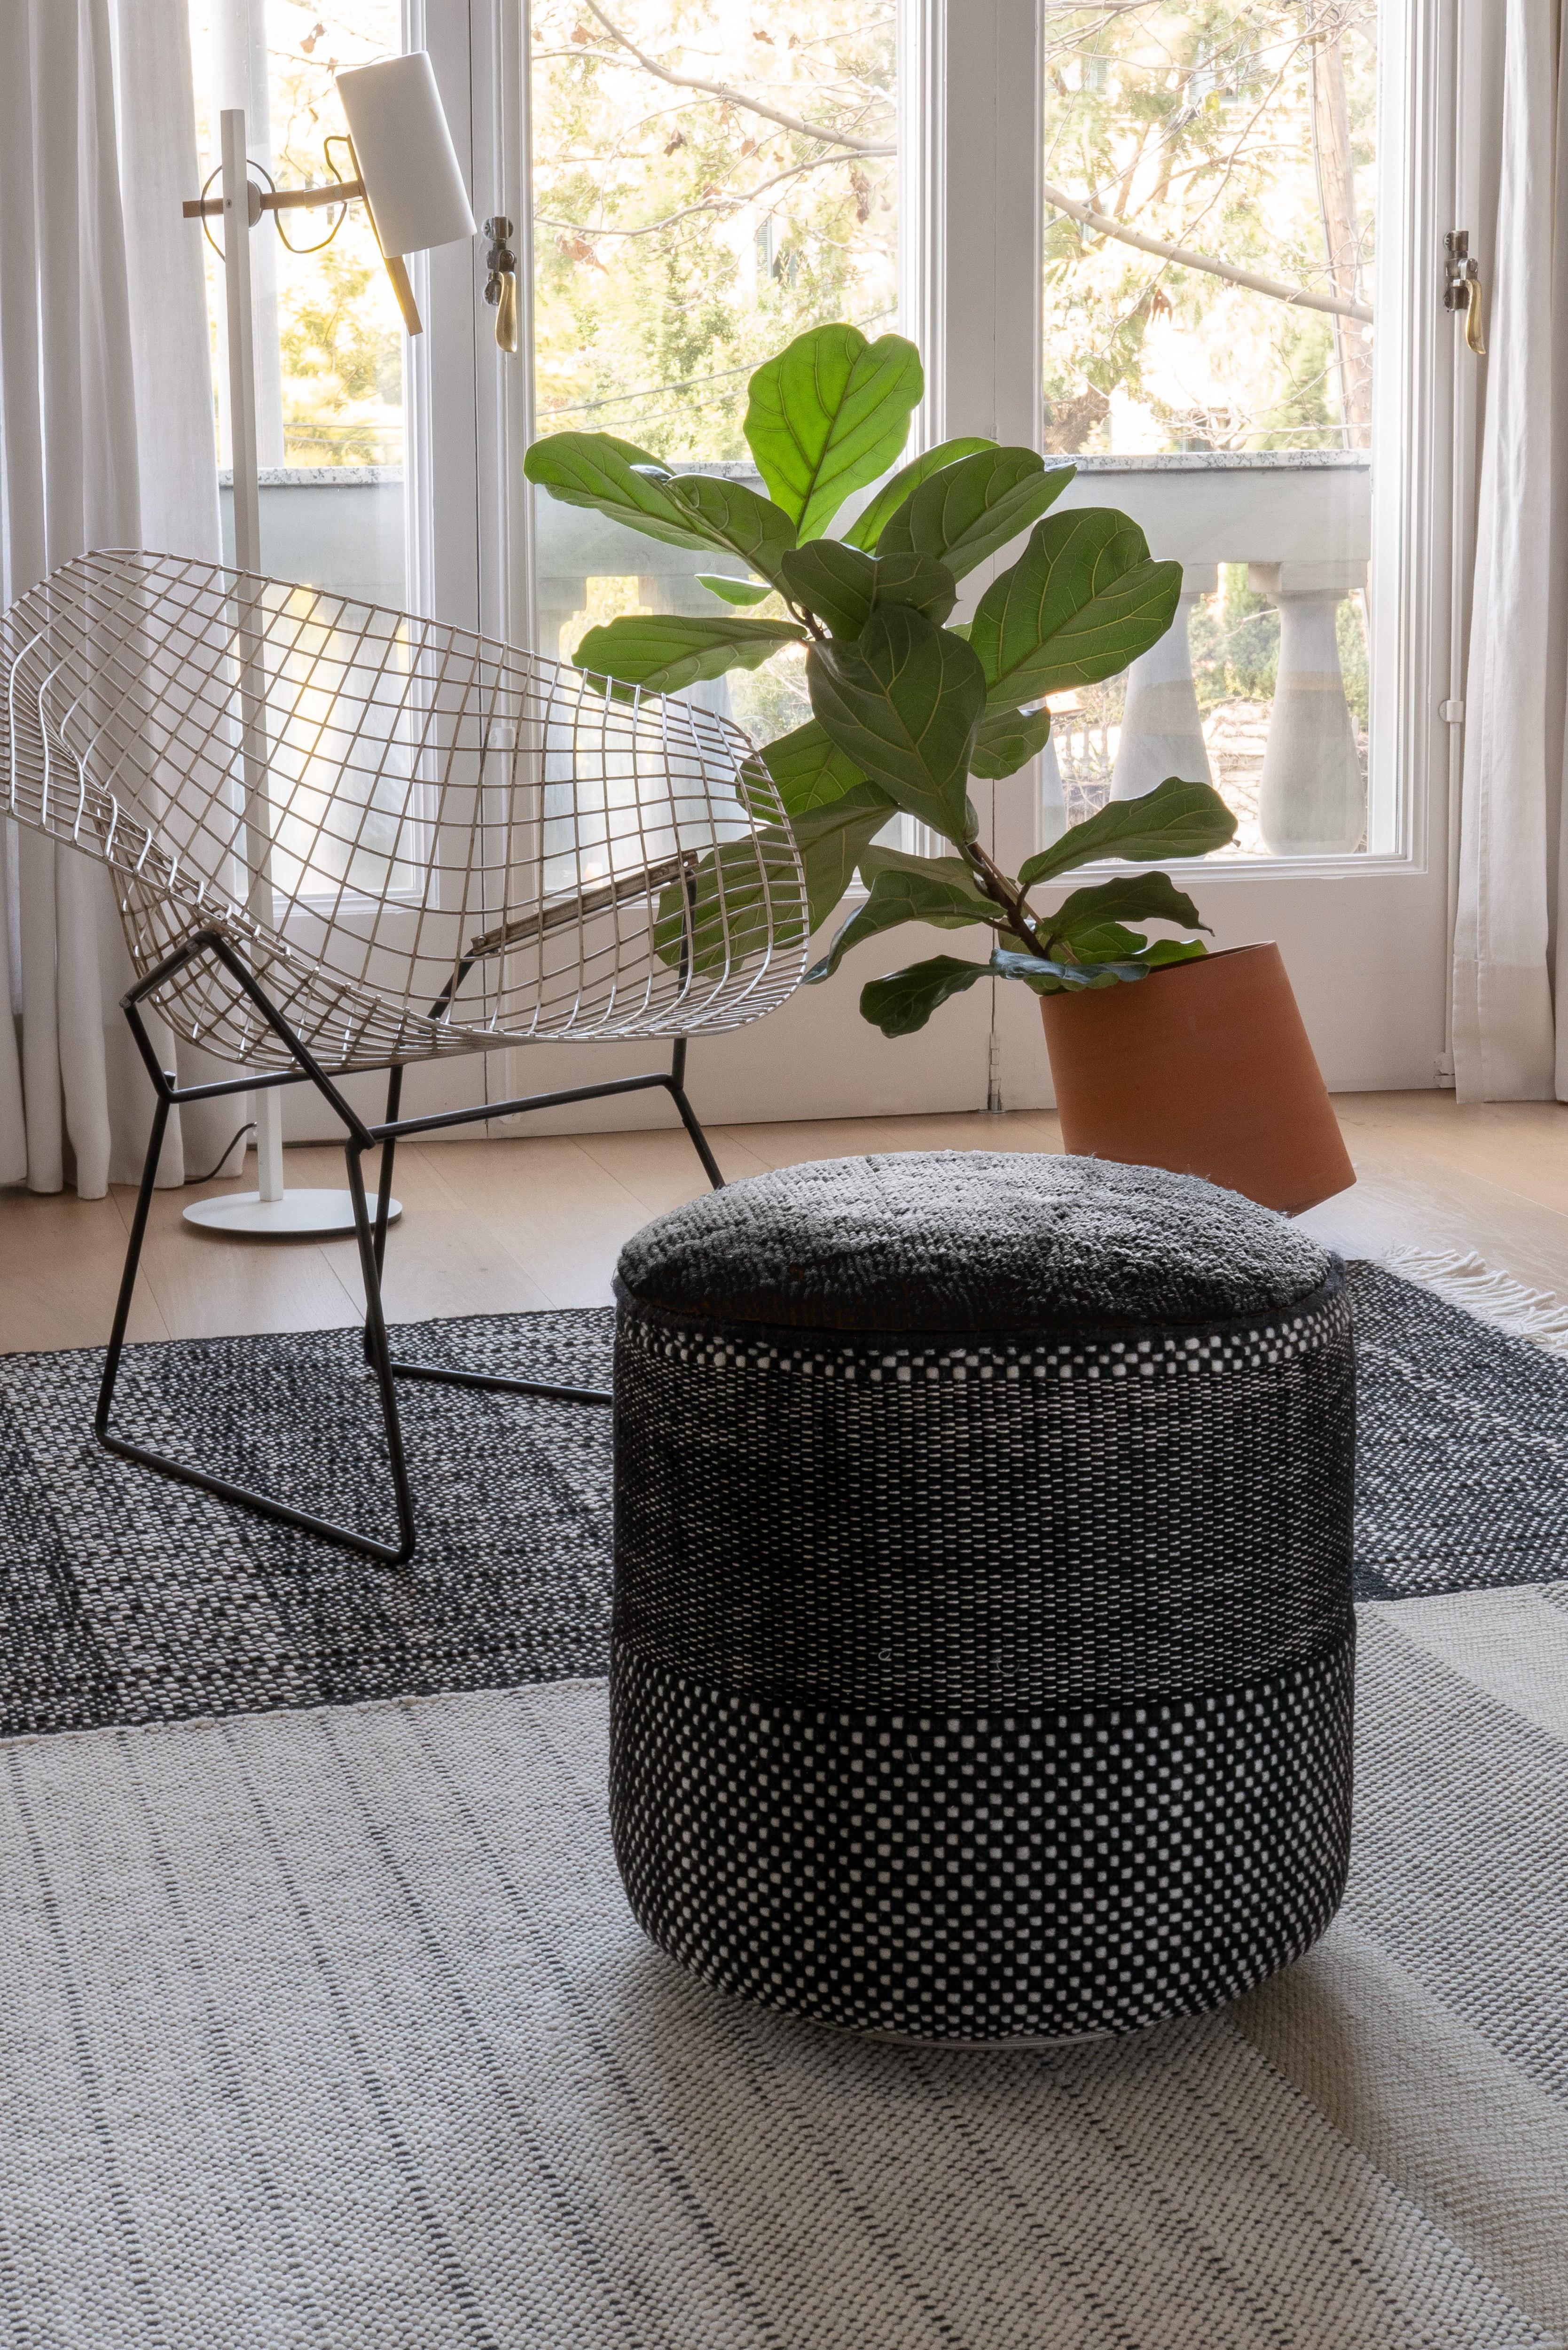 The collections Tres and Persian Colors come together to create a very special pouf, a lightweight cylindrical accessory, manageable and adaptable to any space, presented in Black. The combination Tres + Persian Colors impact the senses in a very